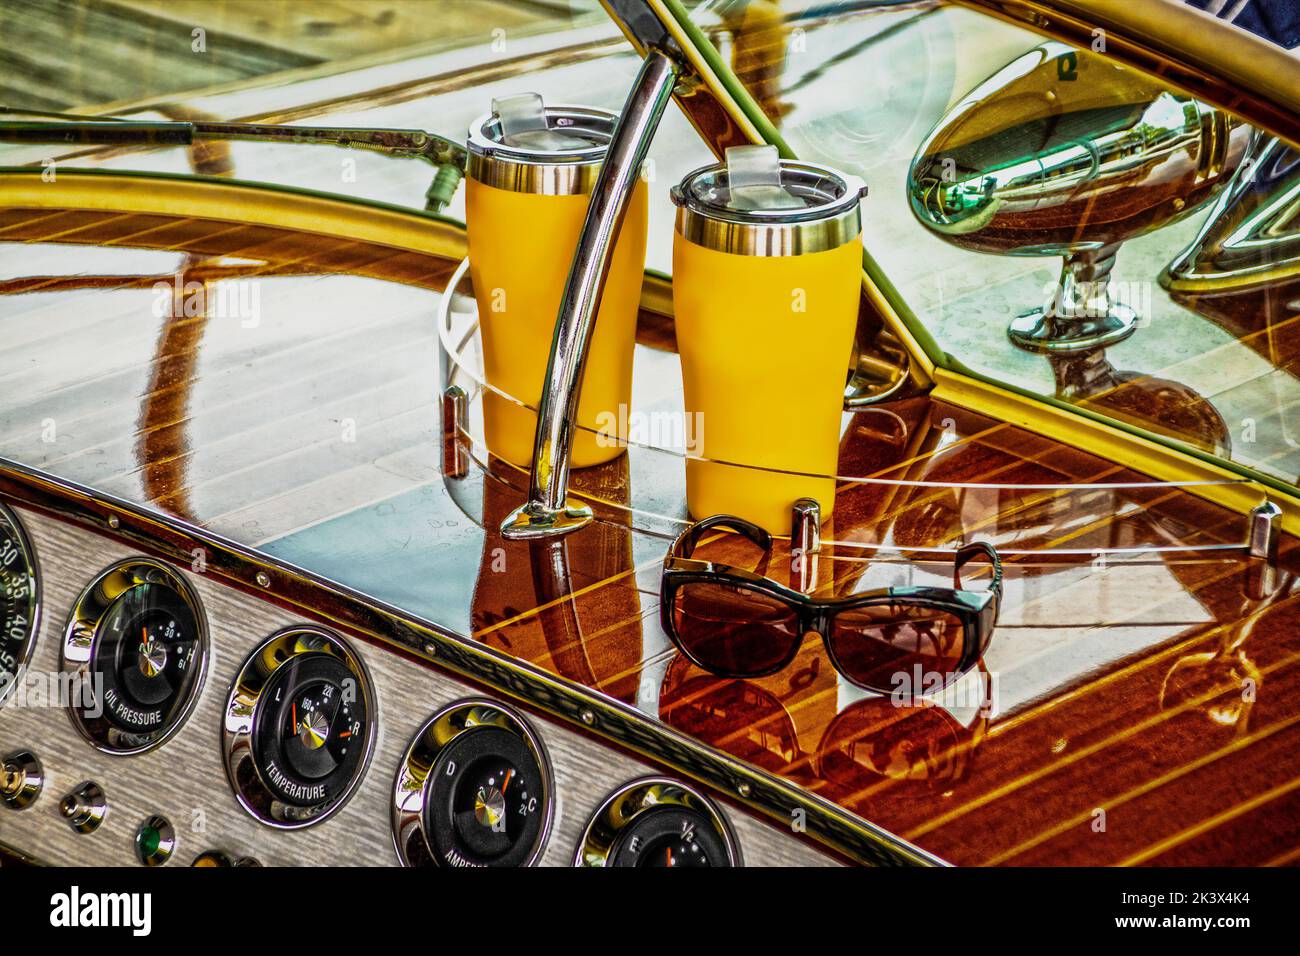 Dash of antique classic wooden speedboat holding two insulated drink cups and sunglasses and gauges below - very shinny with reflections on wood and w Stock Photo